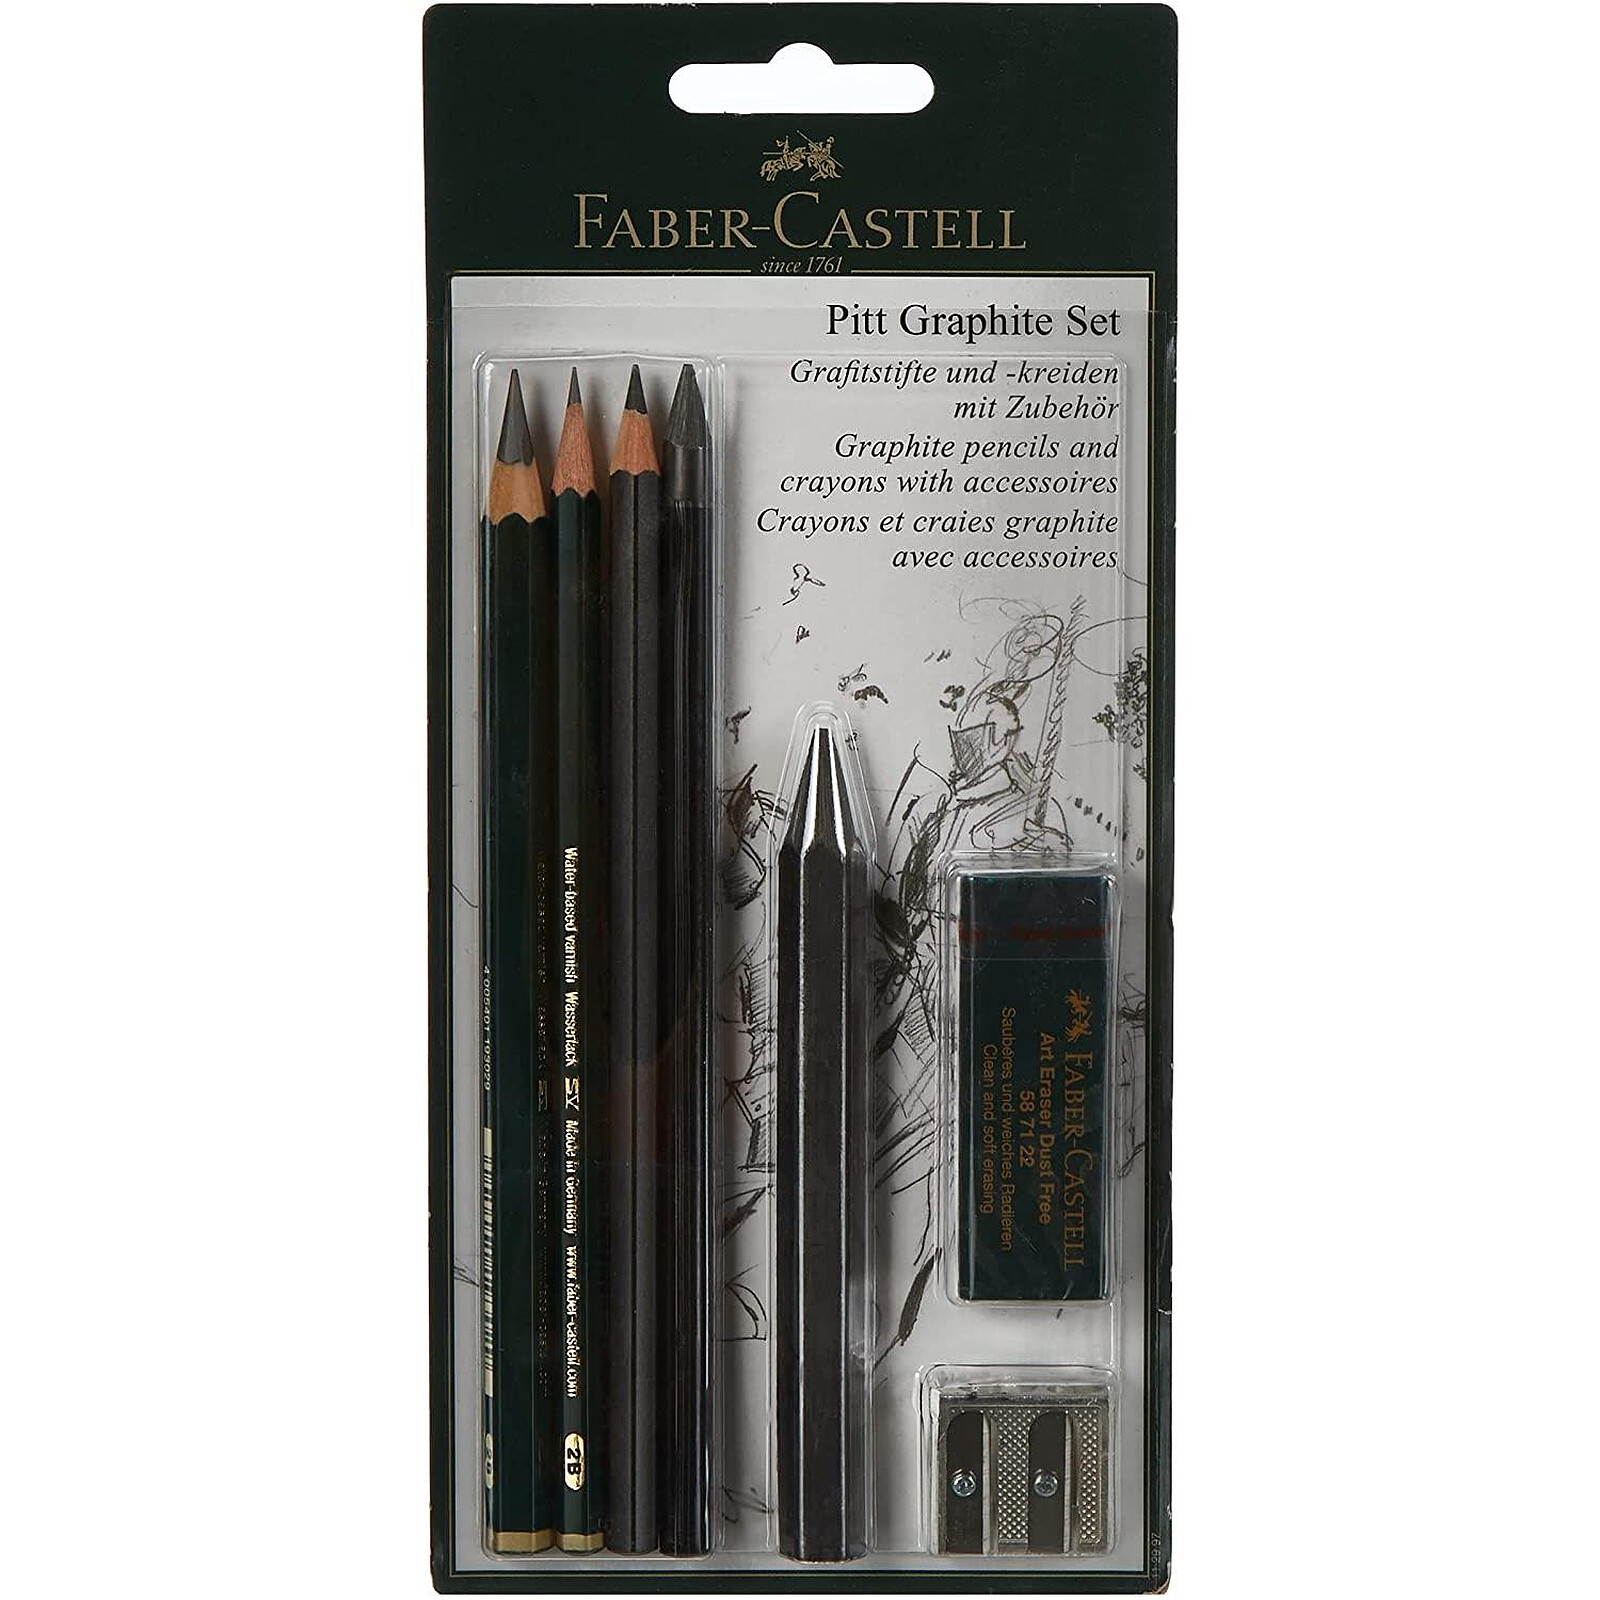 FABER-CASTELL Blister Set Pitt Graphite 5 crayons - gomme - taille-crayon -  Crayon & porte-mine - LDLC